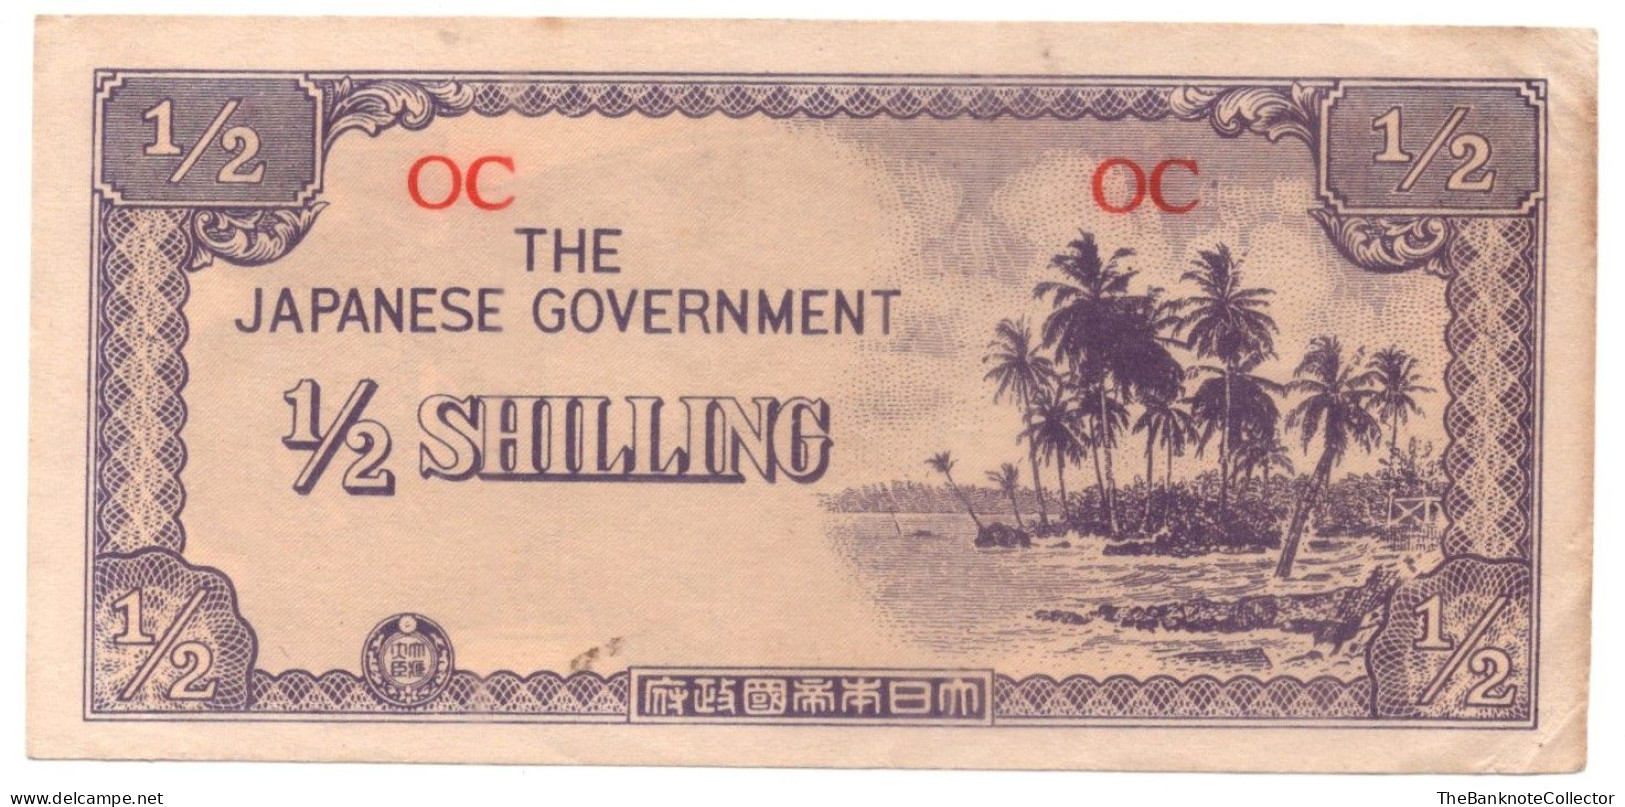 Japan Government Occupation JIM Oceania 1/2 Shilling WWII ND 1942 P-1 EF - Japan